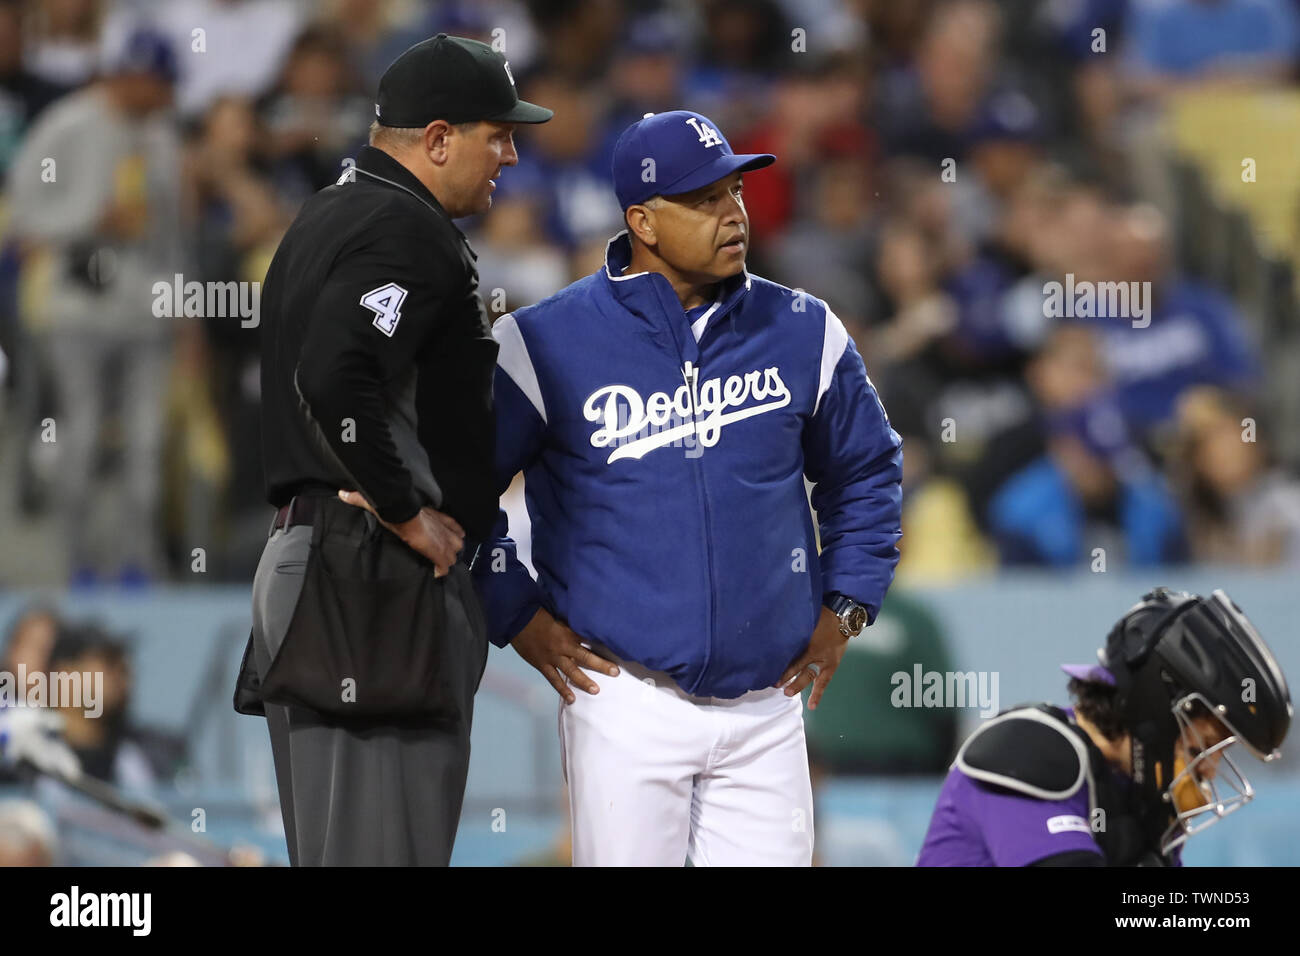 Umpires don't let Los Angeles Dodgers use a position player to pitch — but  manager said he didn't know the rule – The Virginian-Pilot